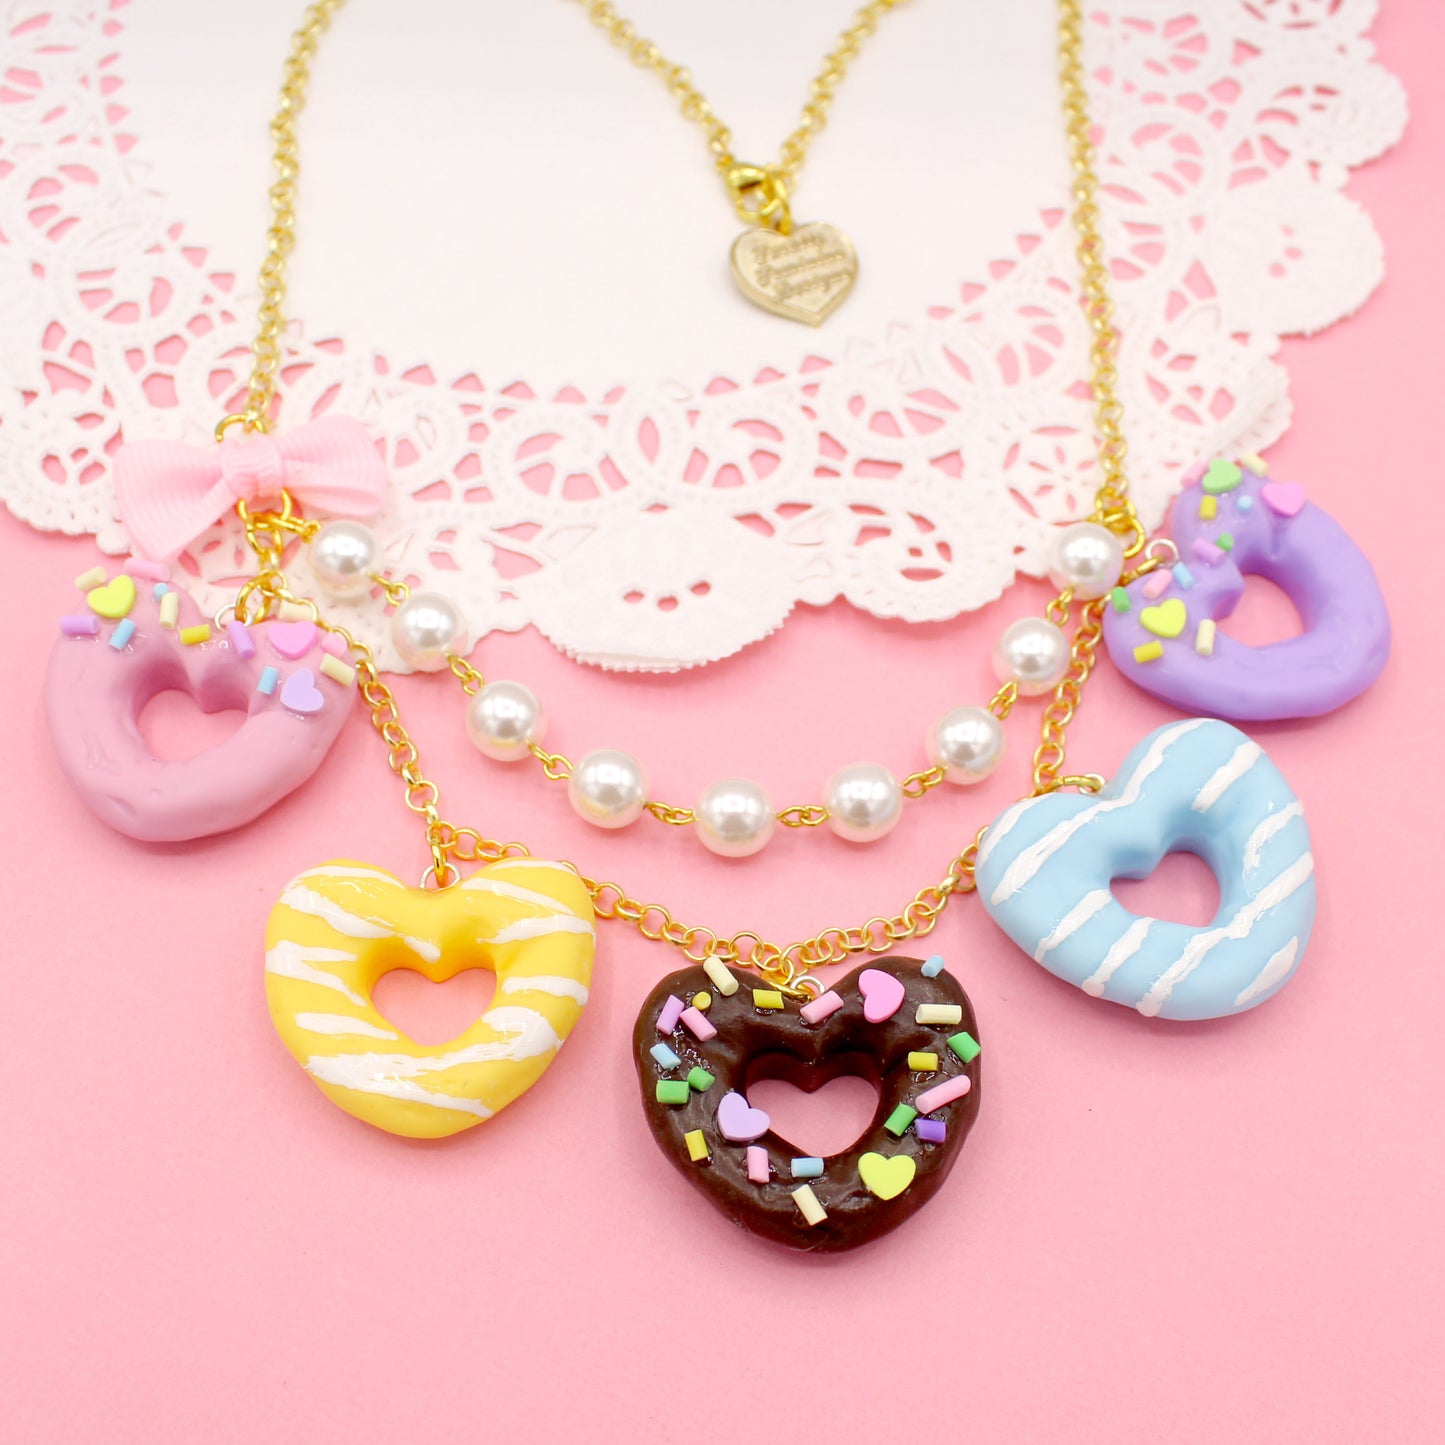 Heart Donut Statement Necklace - Gold or Silver - Fatally Feminine Designs